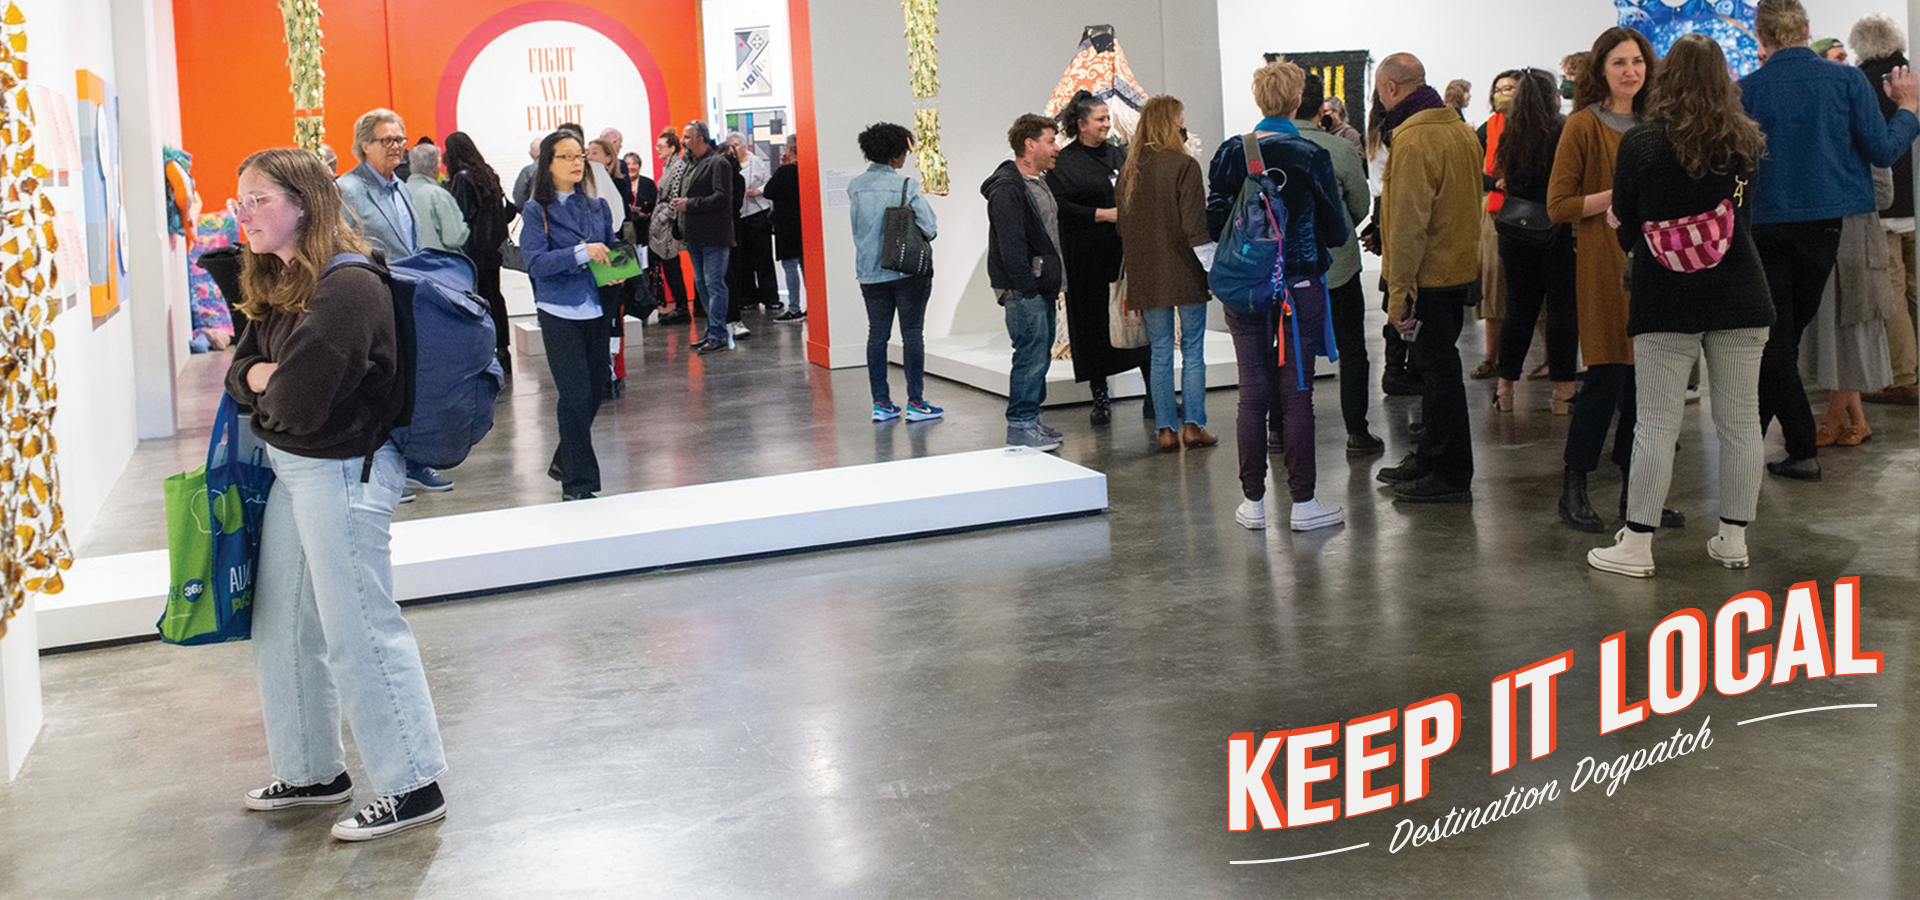 photo of a crowd of people in a museum with text on the lower corner that says "Keep it Local"